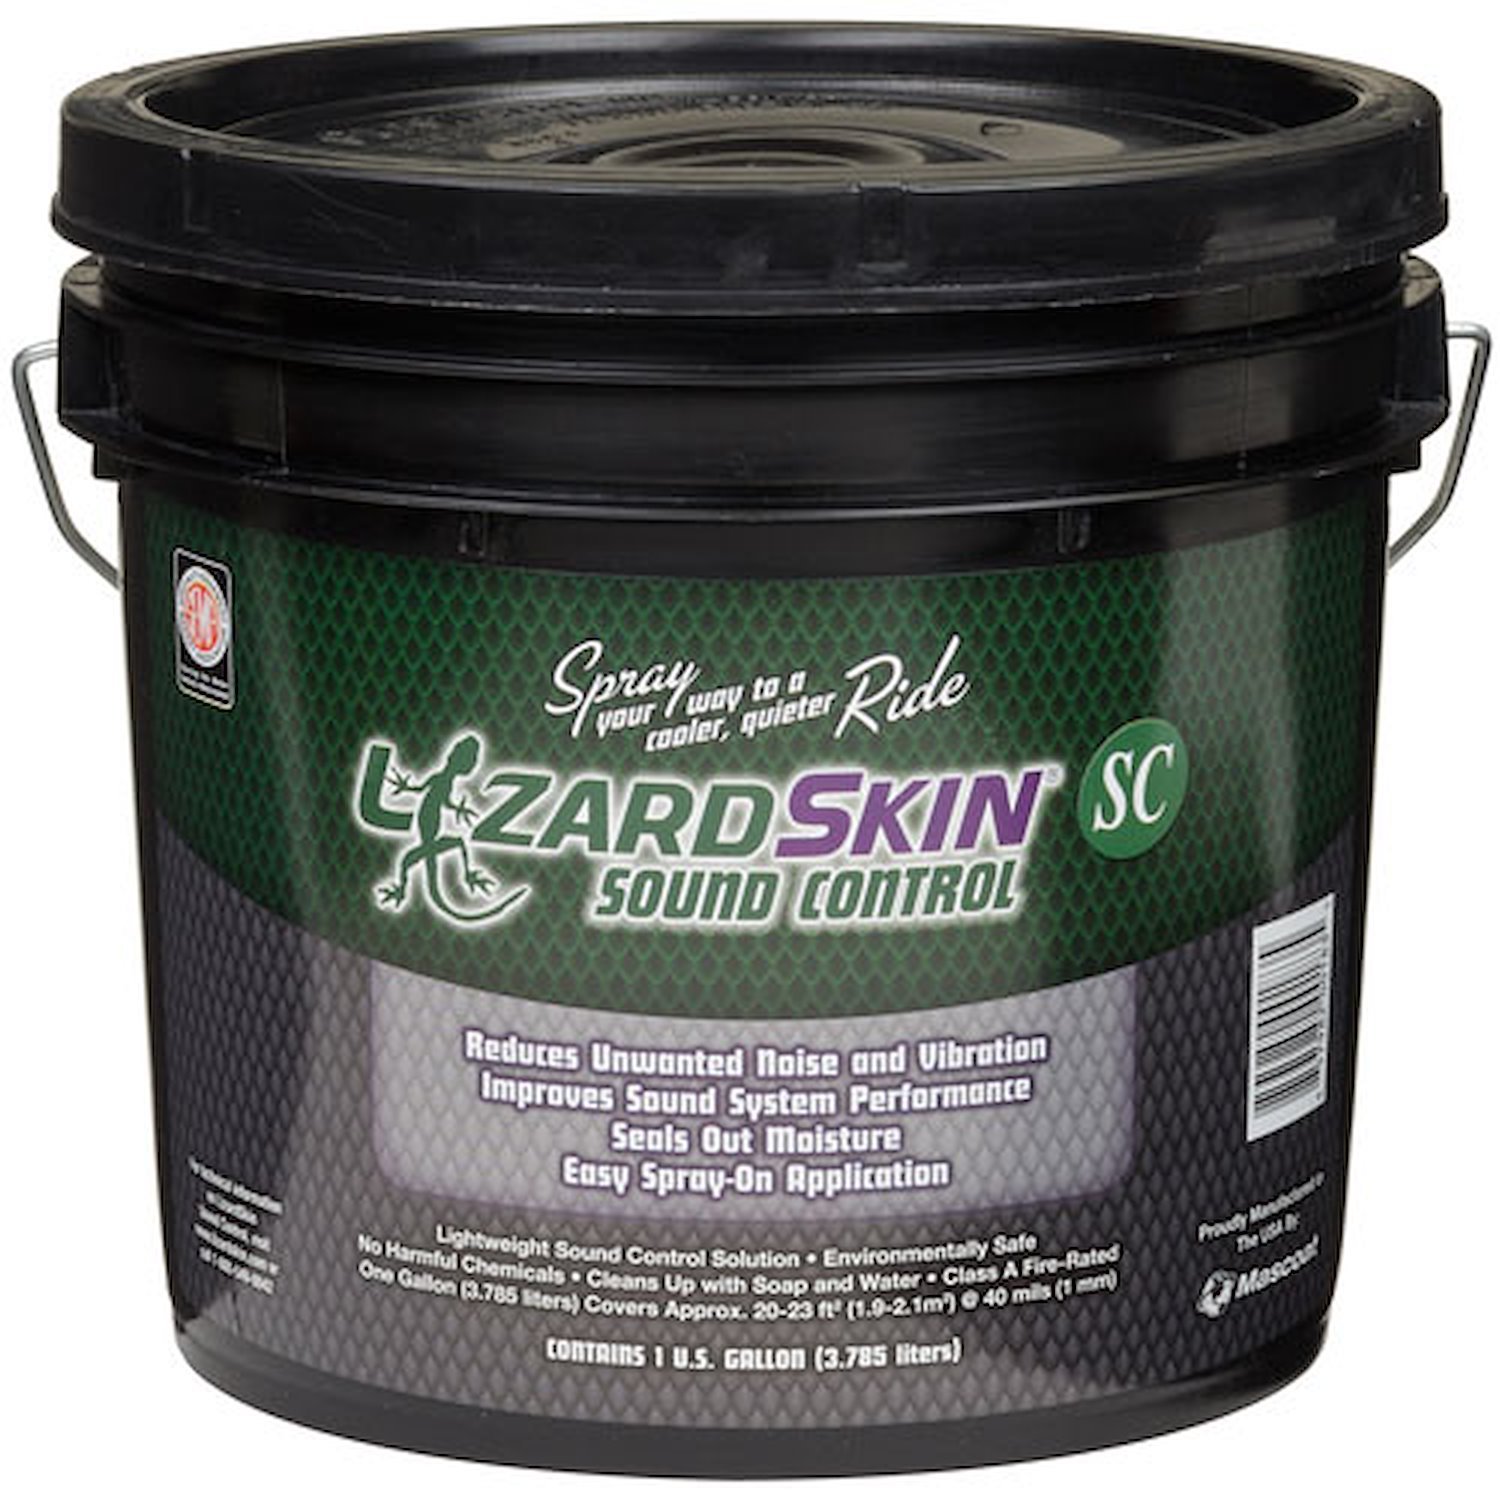 2203-2 Sound Control Insulation [2-Gallons]